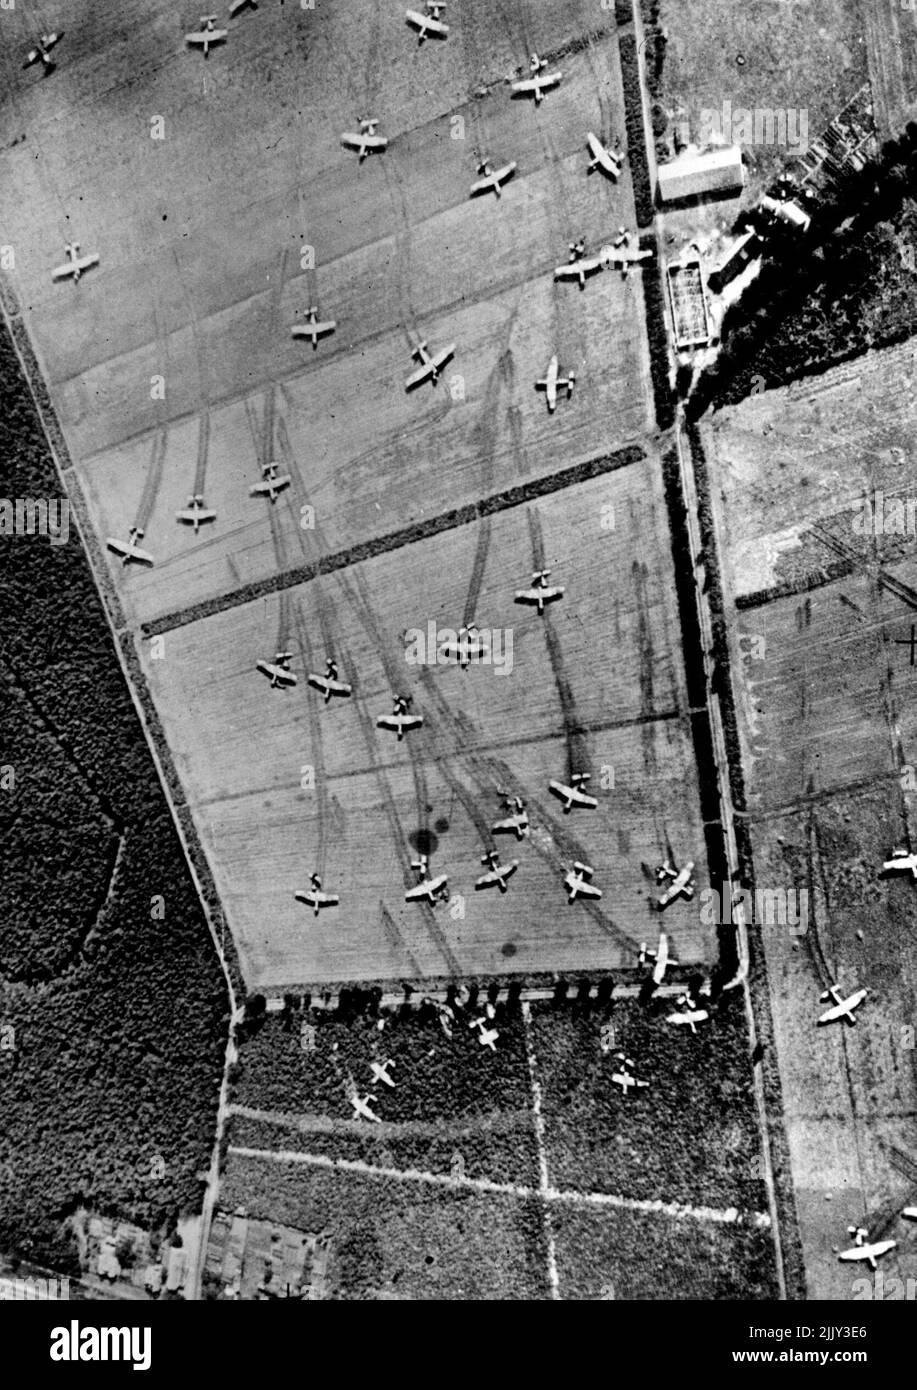 First Airborne Army Lands In Holland -- Pictures taken from an R.A.F photographic Reconnaissance spitfire, of the scene in Holland when the Allied airborne army carried out its first great operation on September 17th. Gliders lying at the Ends of the tracks they made when landing in Holland. November 27, 1944. (Photo by British Official Photograph). Stock Photo